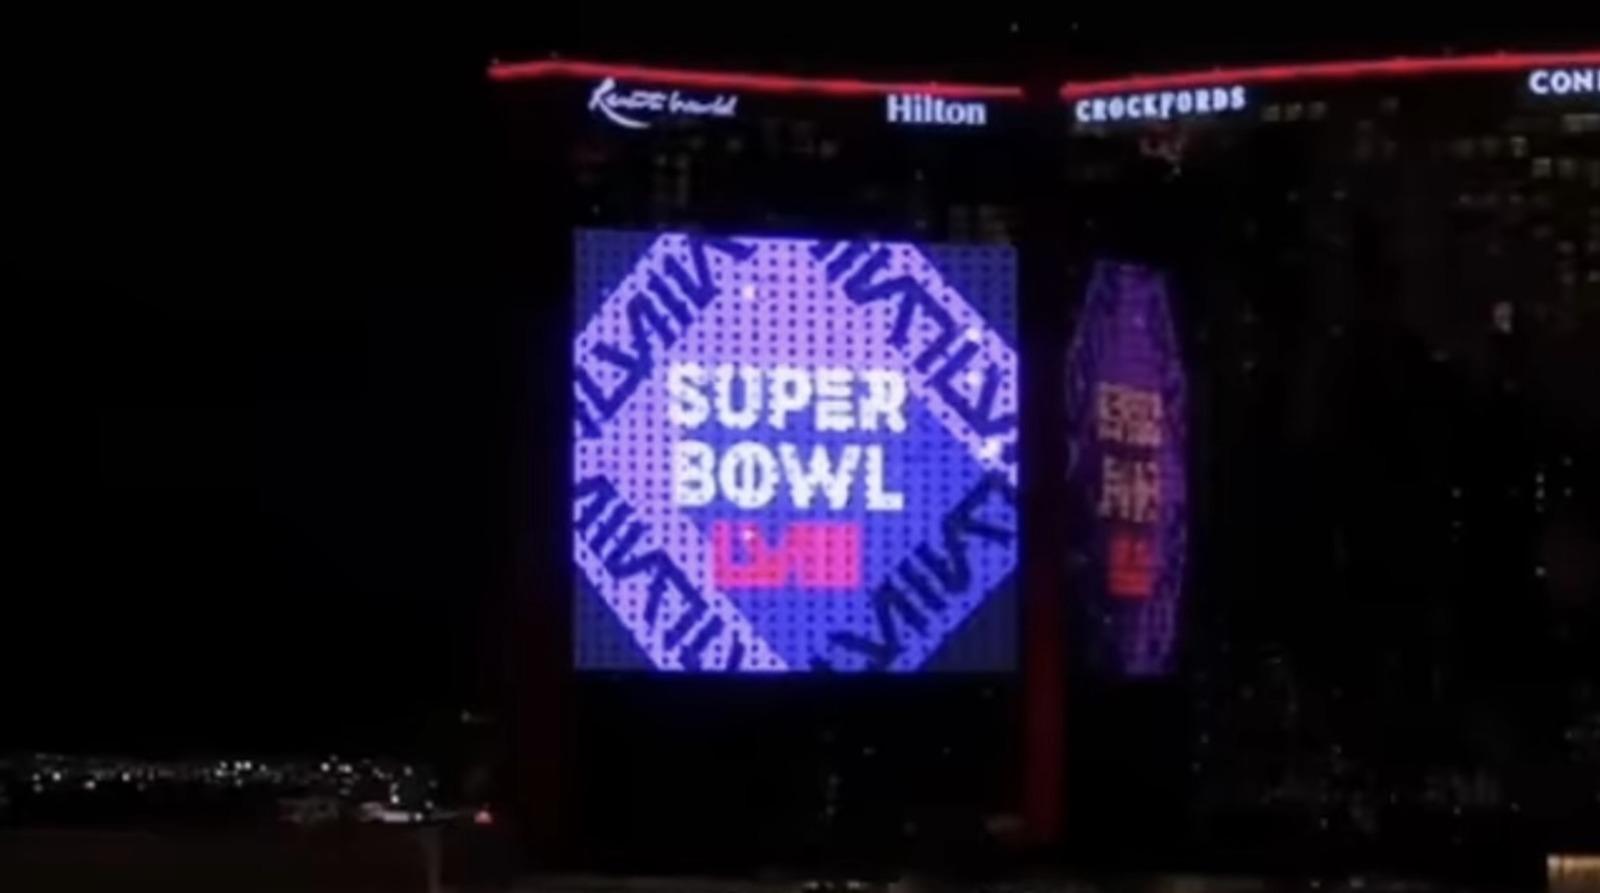 Super Bowl LVIII will kick off this weekend, but many fans are wondering what “LVIII” means.